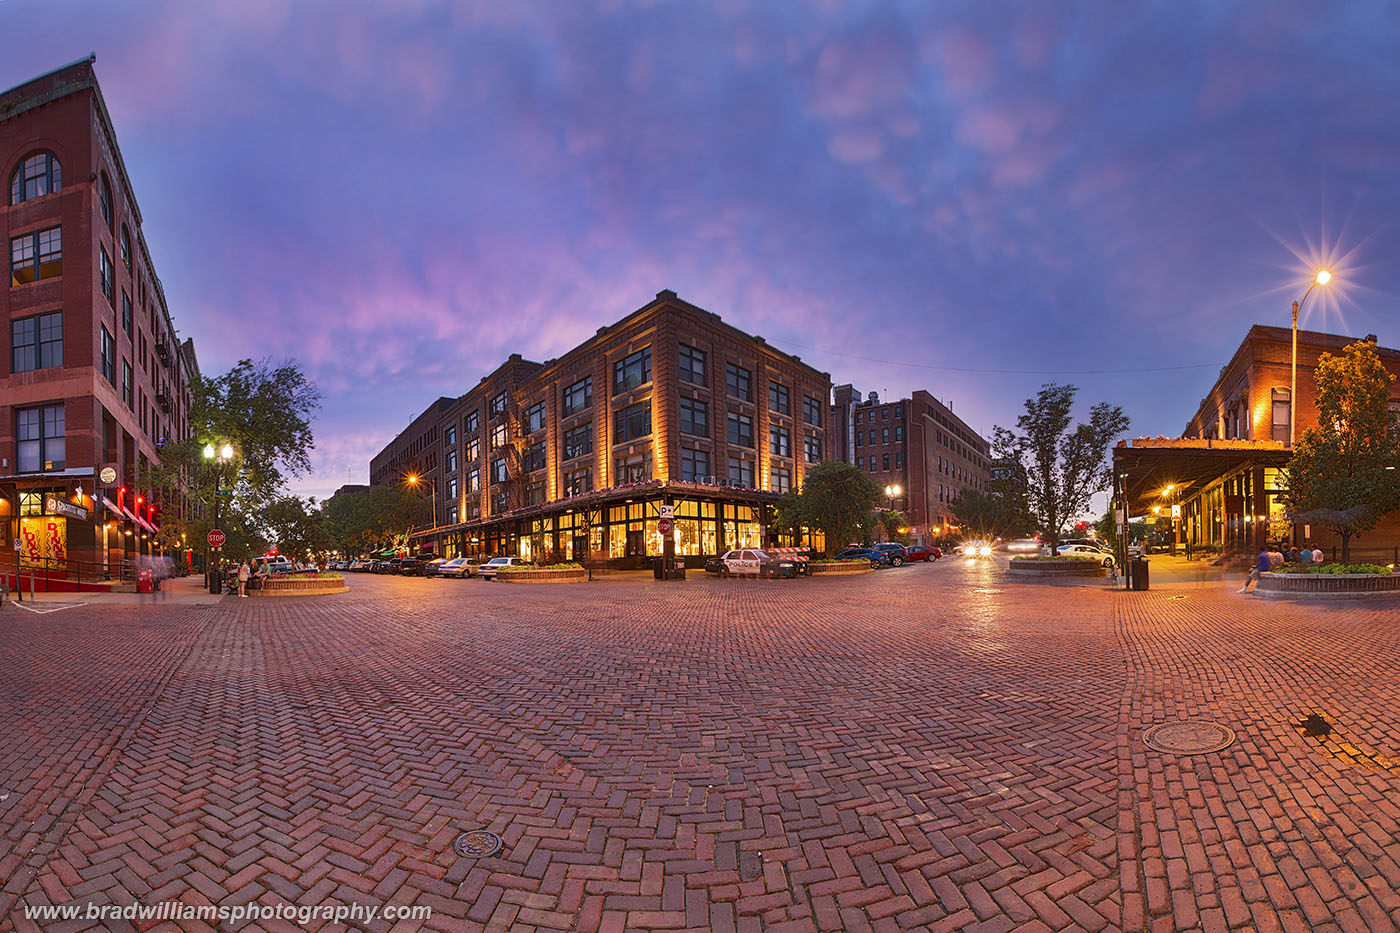 A strong afternoon thunderstorm gave way to a beautiful sunset in Omaha's historic Old Market.